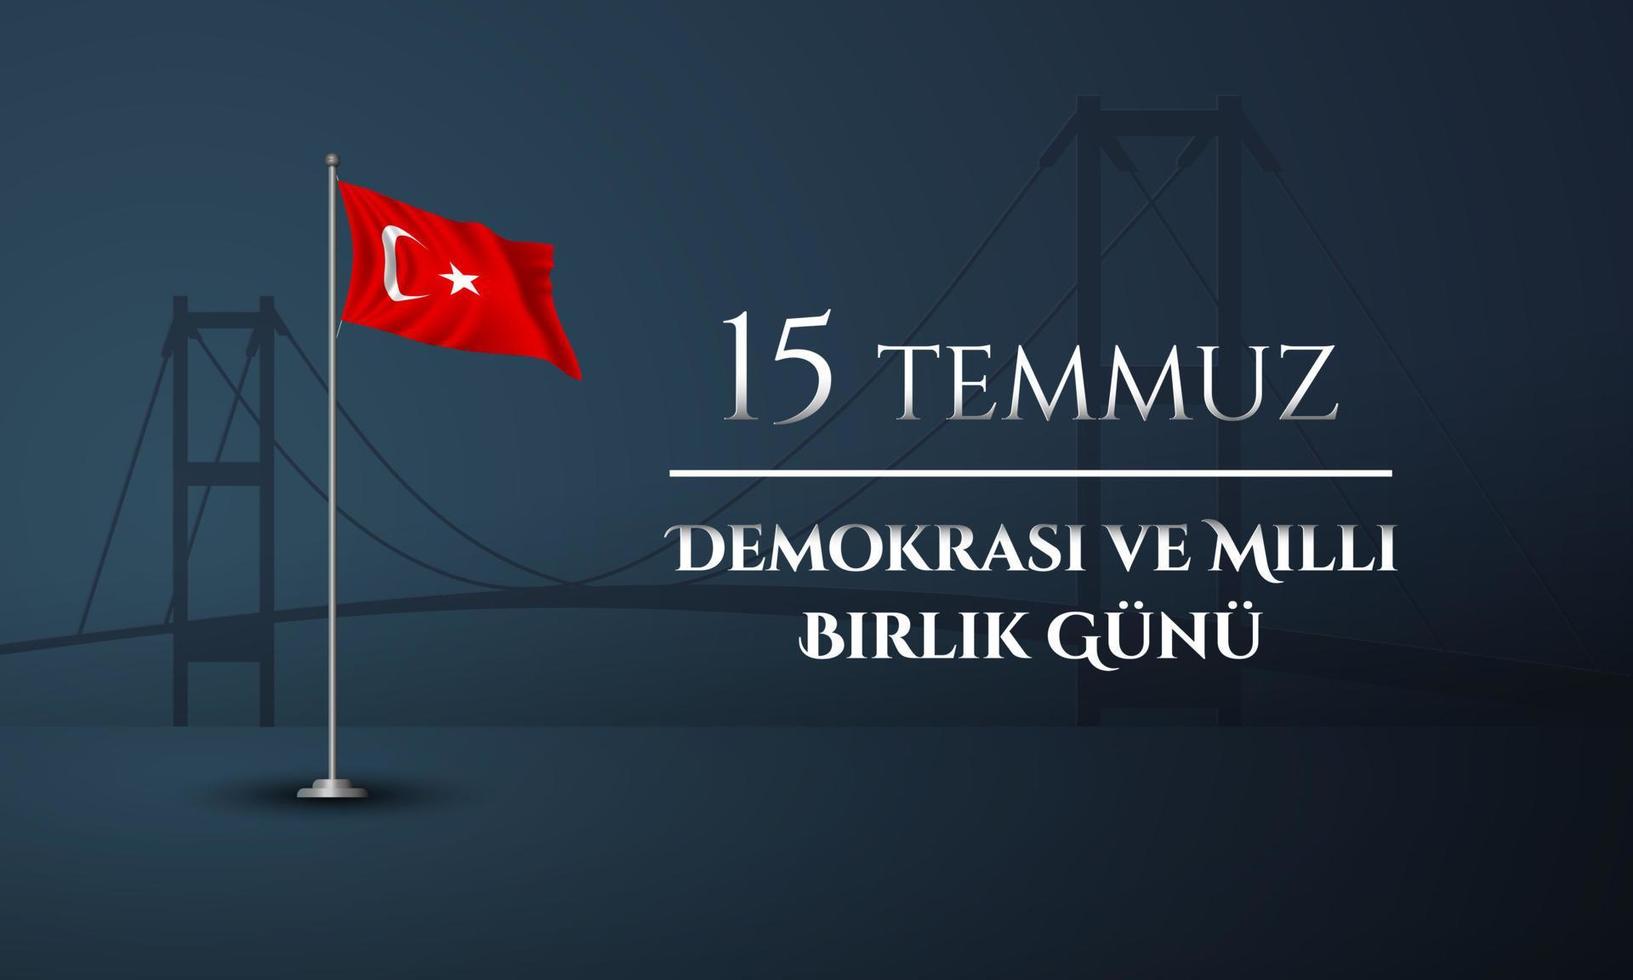 The Day of Democracy and National Unity Background Design. vector